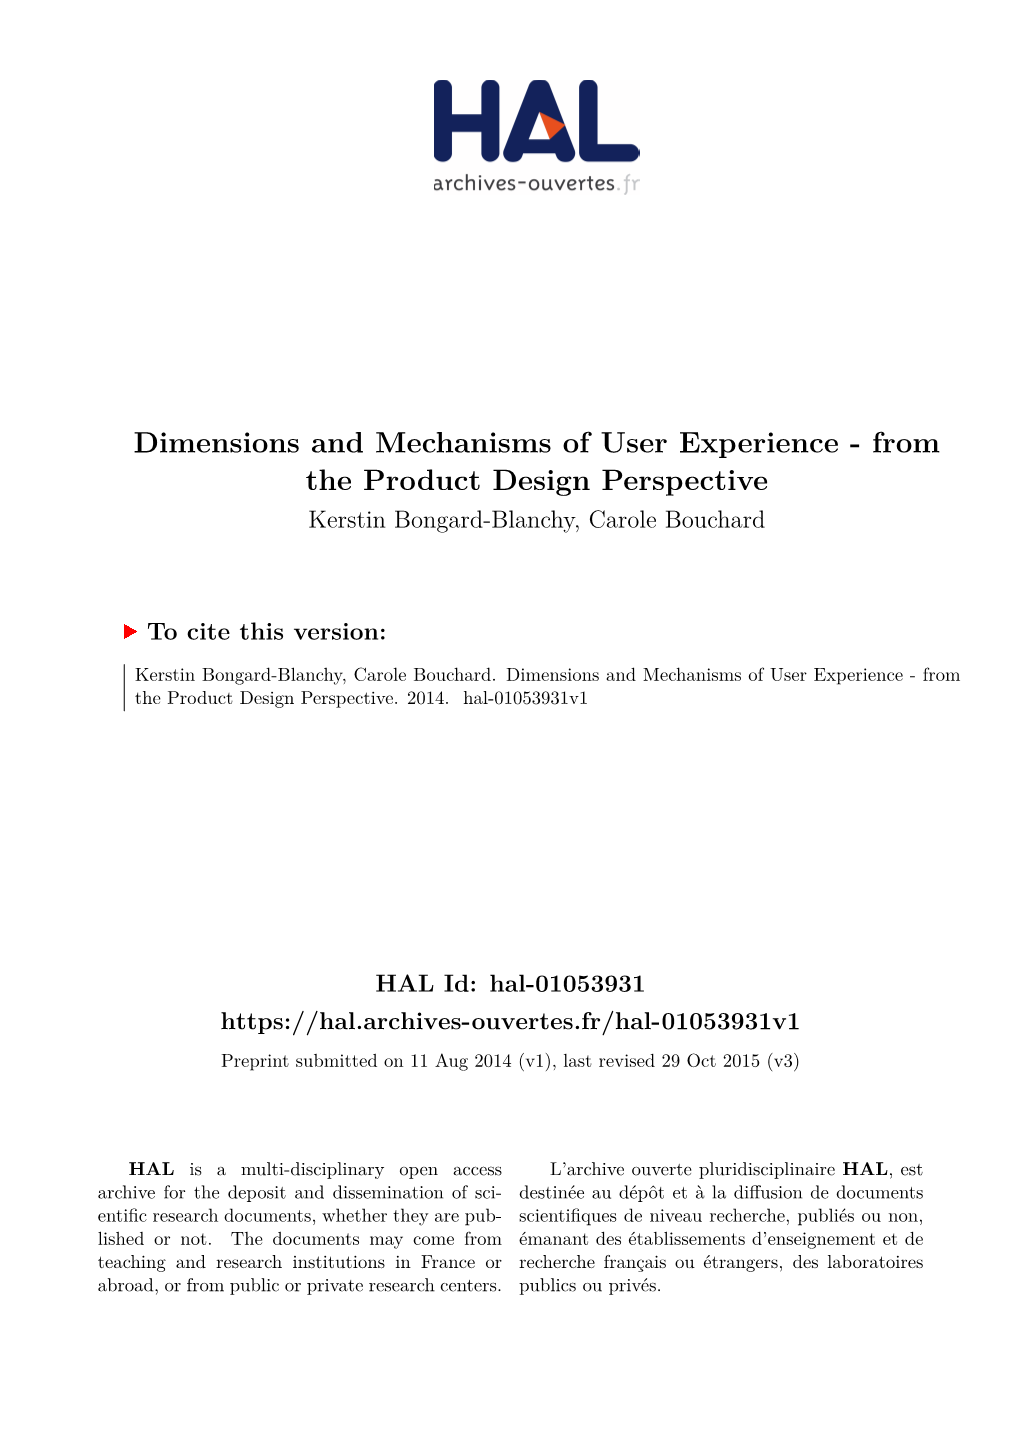 Dimensions and Mechanisms of User Experience - from the Product Design Perspective Kerstin Bongard-Blanchy, Carole Bouchard